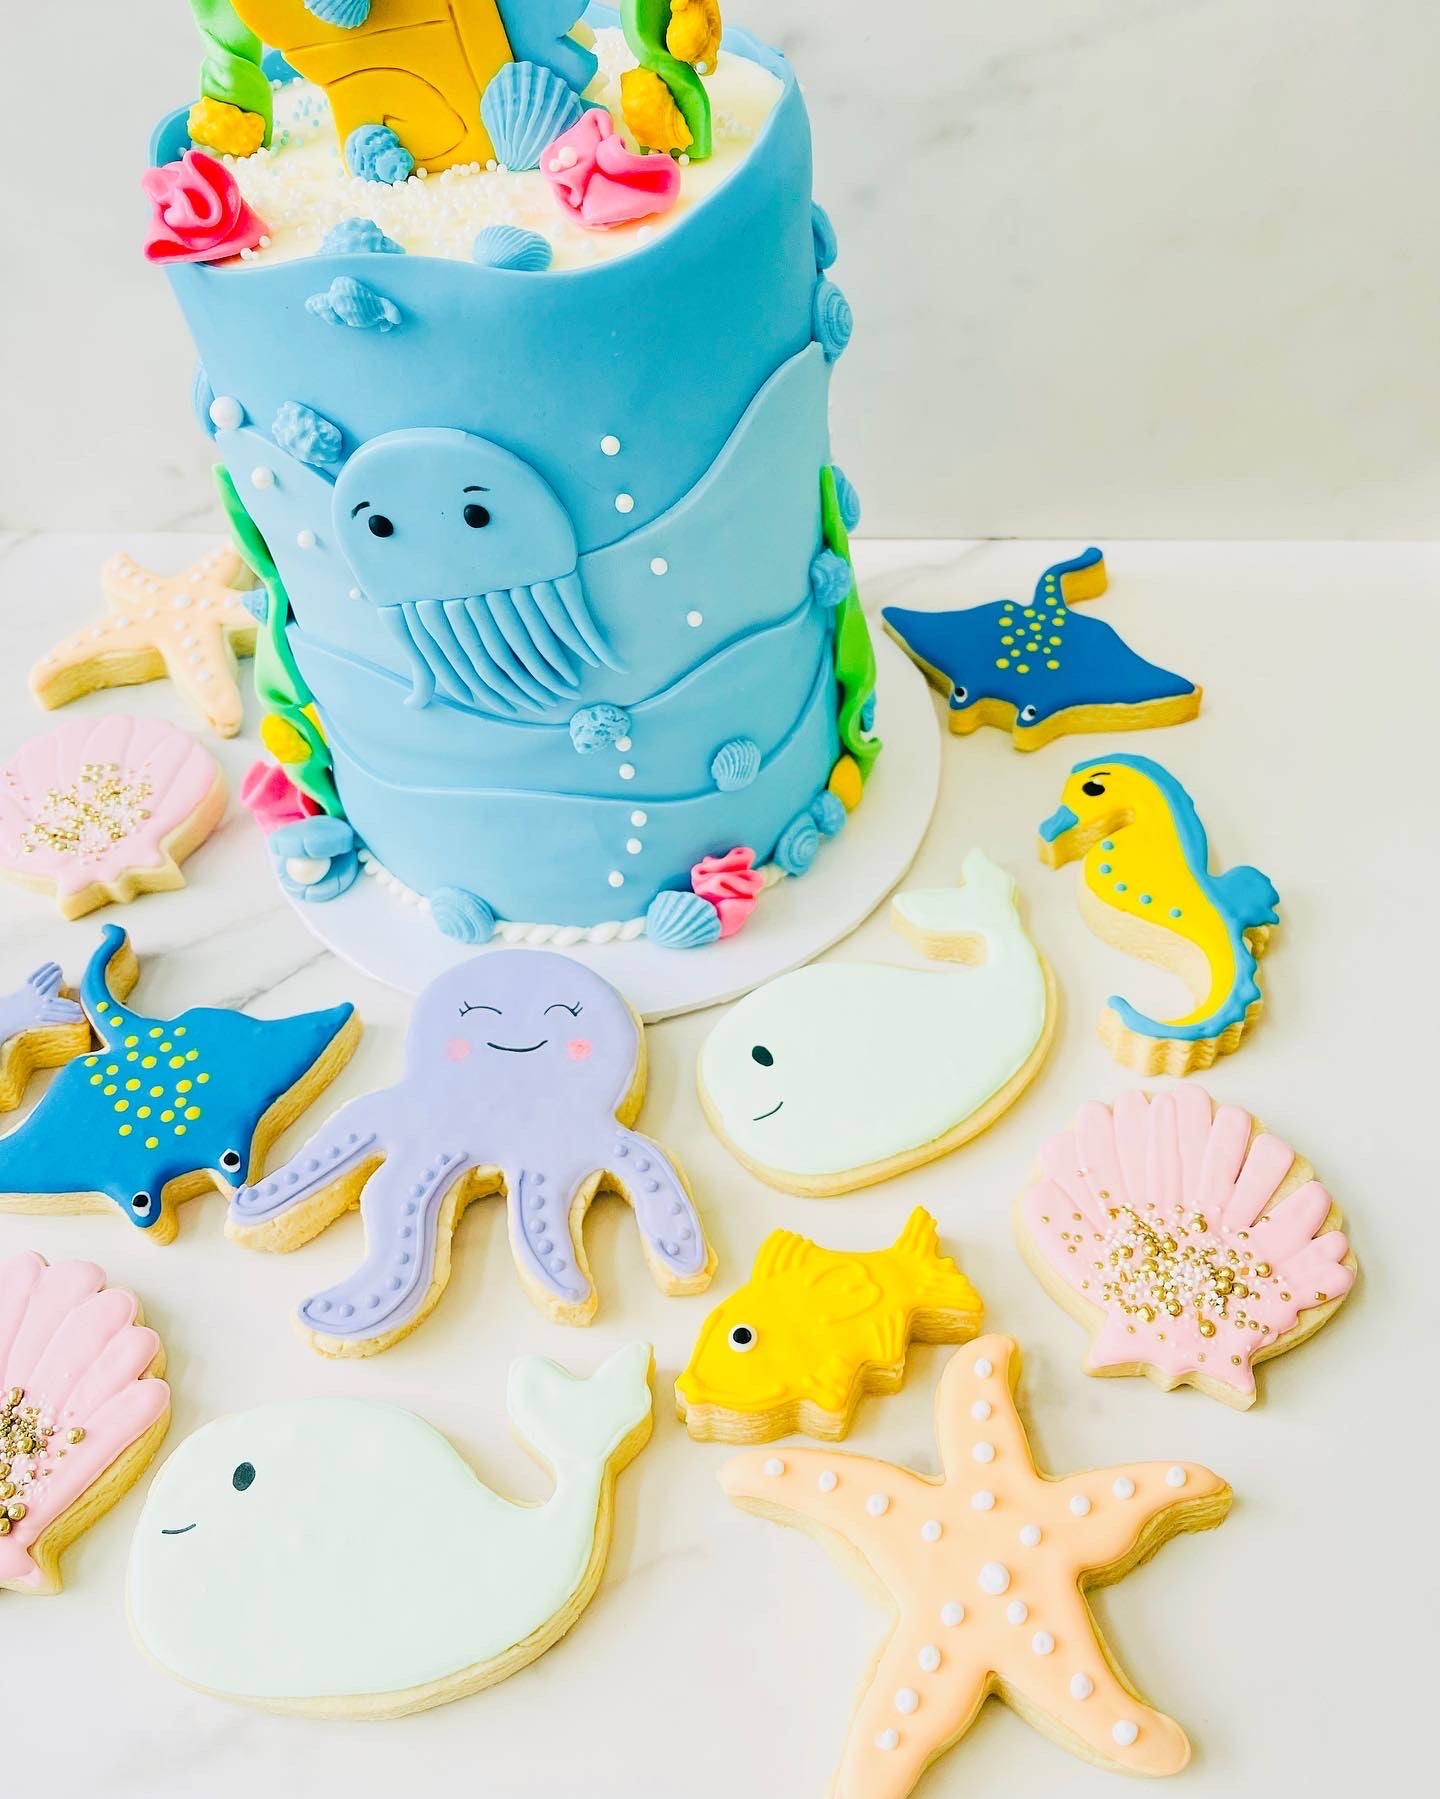 Gurgaon Special: Cute Baby Shower Cake Delivery in Gurgaon @ ₹2,349.00